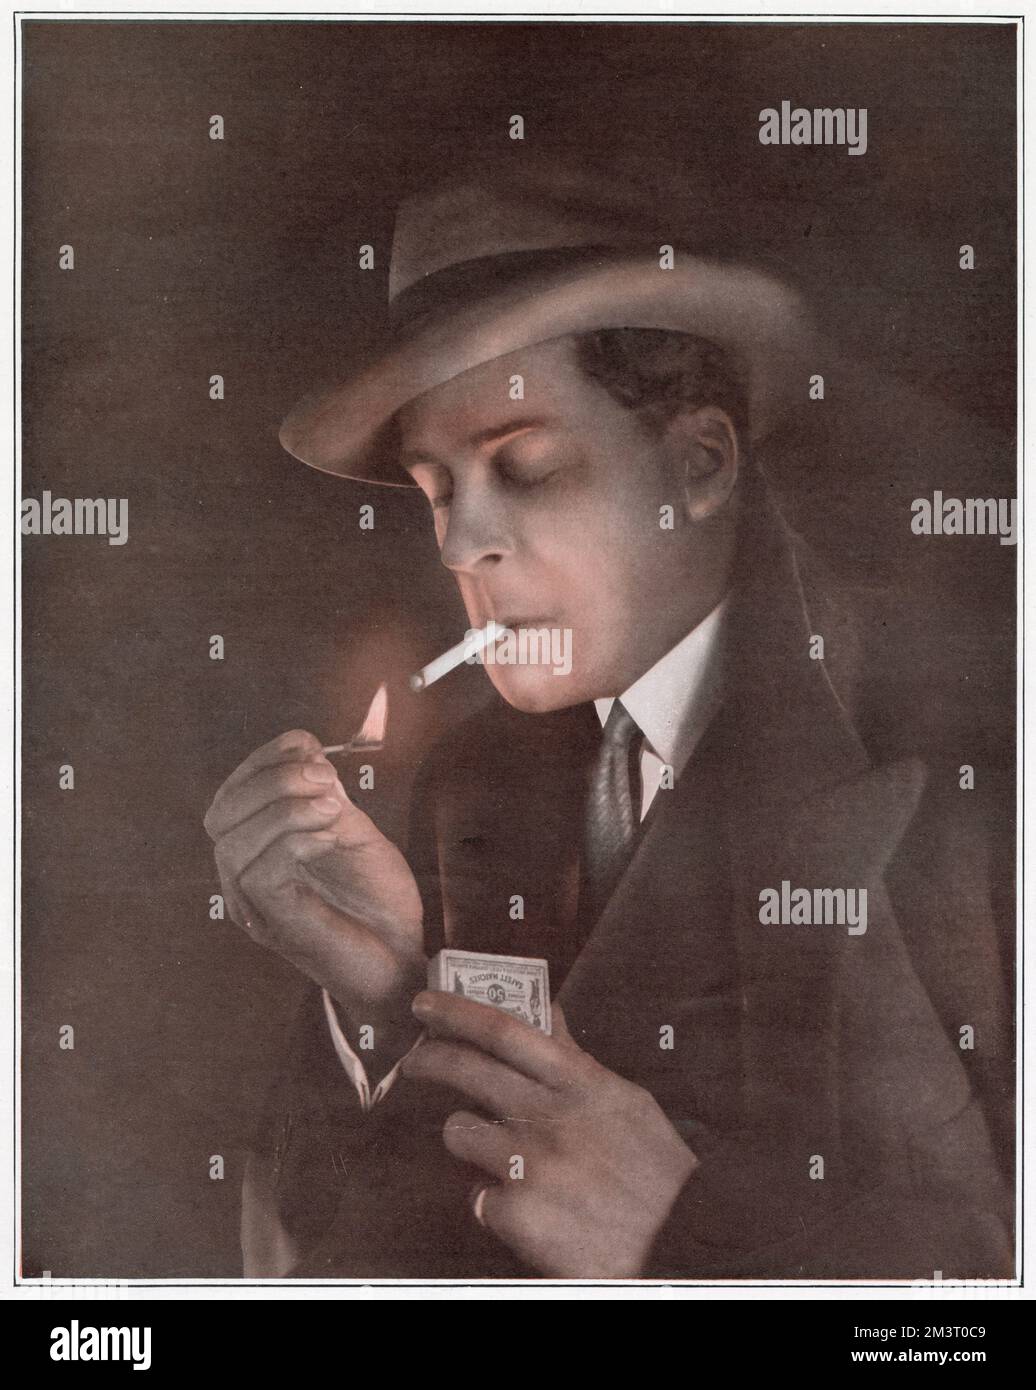 Jack Buchanan (1890 - 1957), Scottish theatre and film actor, singer, dancer, producer and director. Pictured smoking in a page from The Sketch that reported on the fact that in order to avoid hefty entertainment tax, the Shaftesbury Theatre was admitting the audience via boxes of chocolates or cigarettes, 'as a gesture against severe cabaret competition.'     Date: 1924 Stock Photo